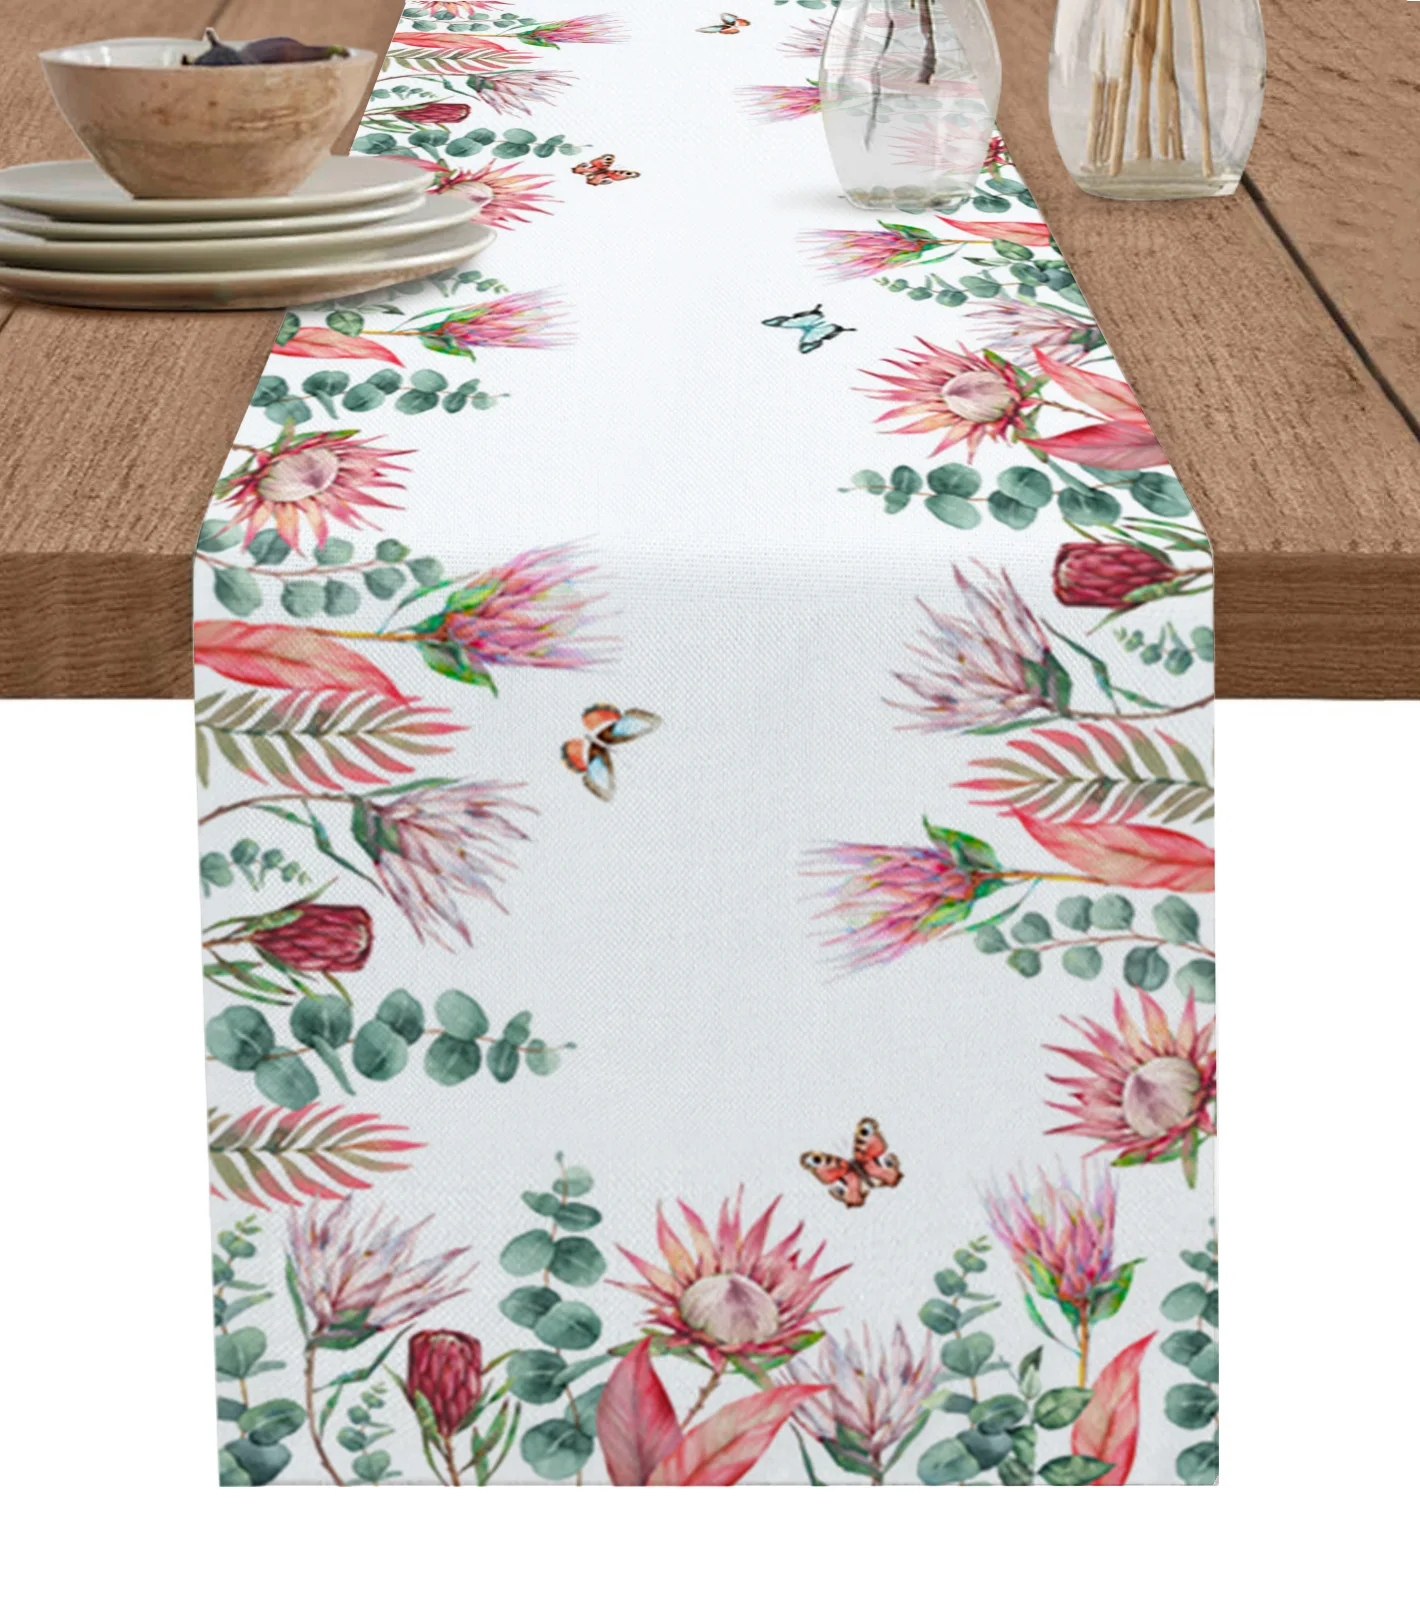 

Idyllic Tropical Plants Flowers Butterflies Table Runner Christmas Decoration Tablecloth Wedding Party Decor Table Cover